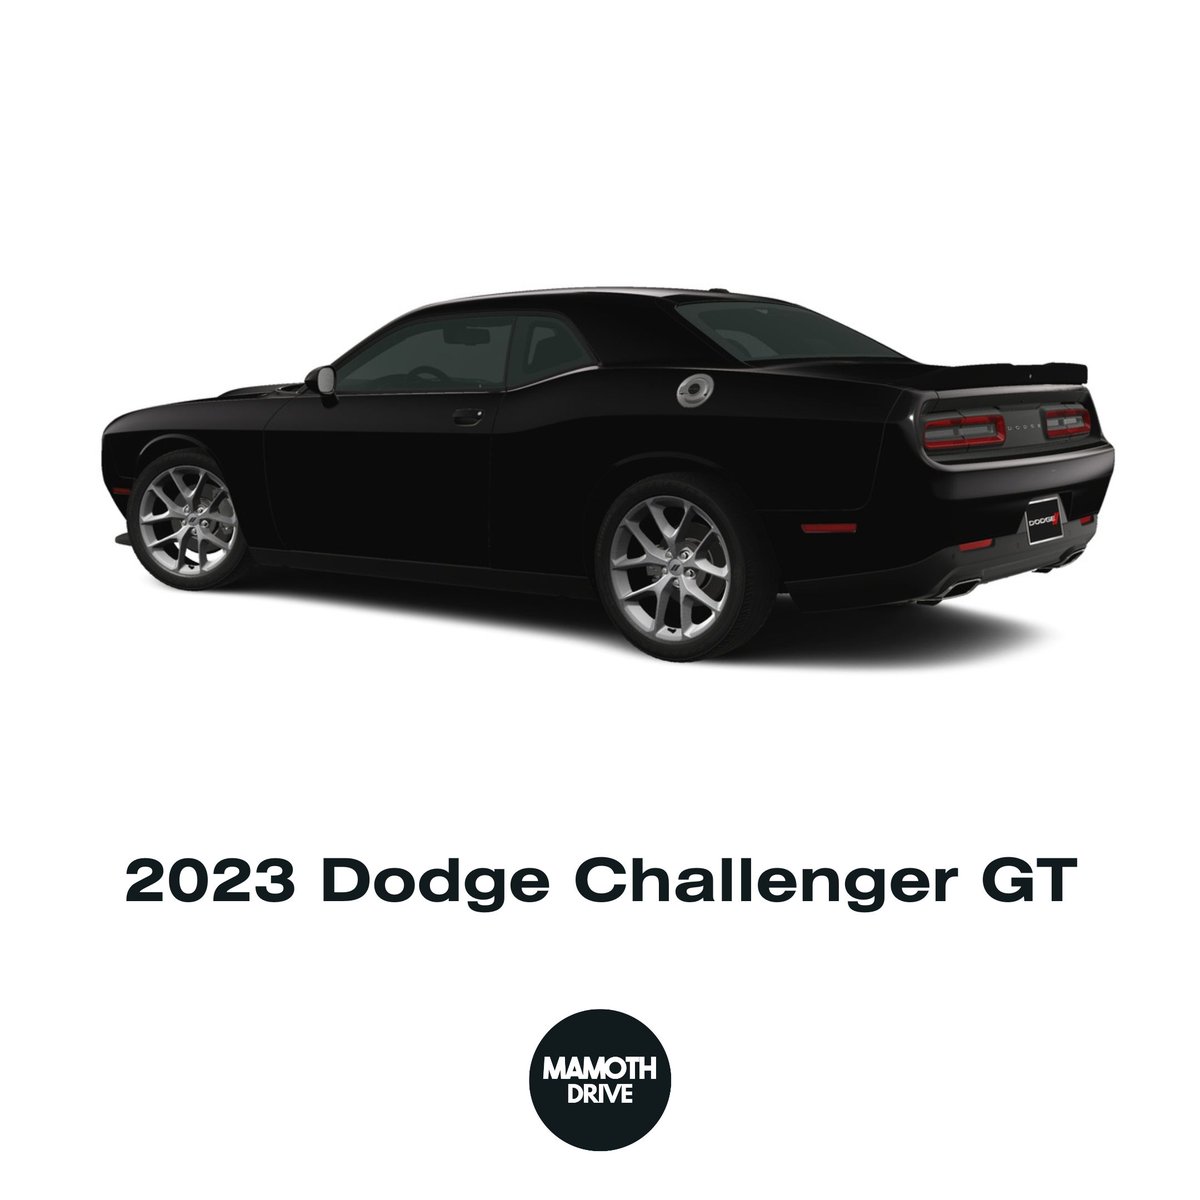 2023 Dodge Challenger GT
The 2023 Dodge Challenger pays tribute to its muscle car heritage and incorporates up‑to‑the‑minute technology to leave behind a legacy that will last for generations.
#2023DodgeChallenger #ChallengerGT #DodgeMuscle #MuscleCarLove #ModernMuscle